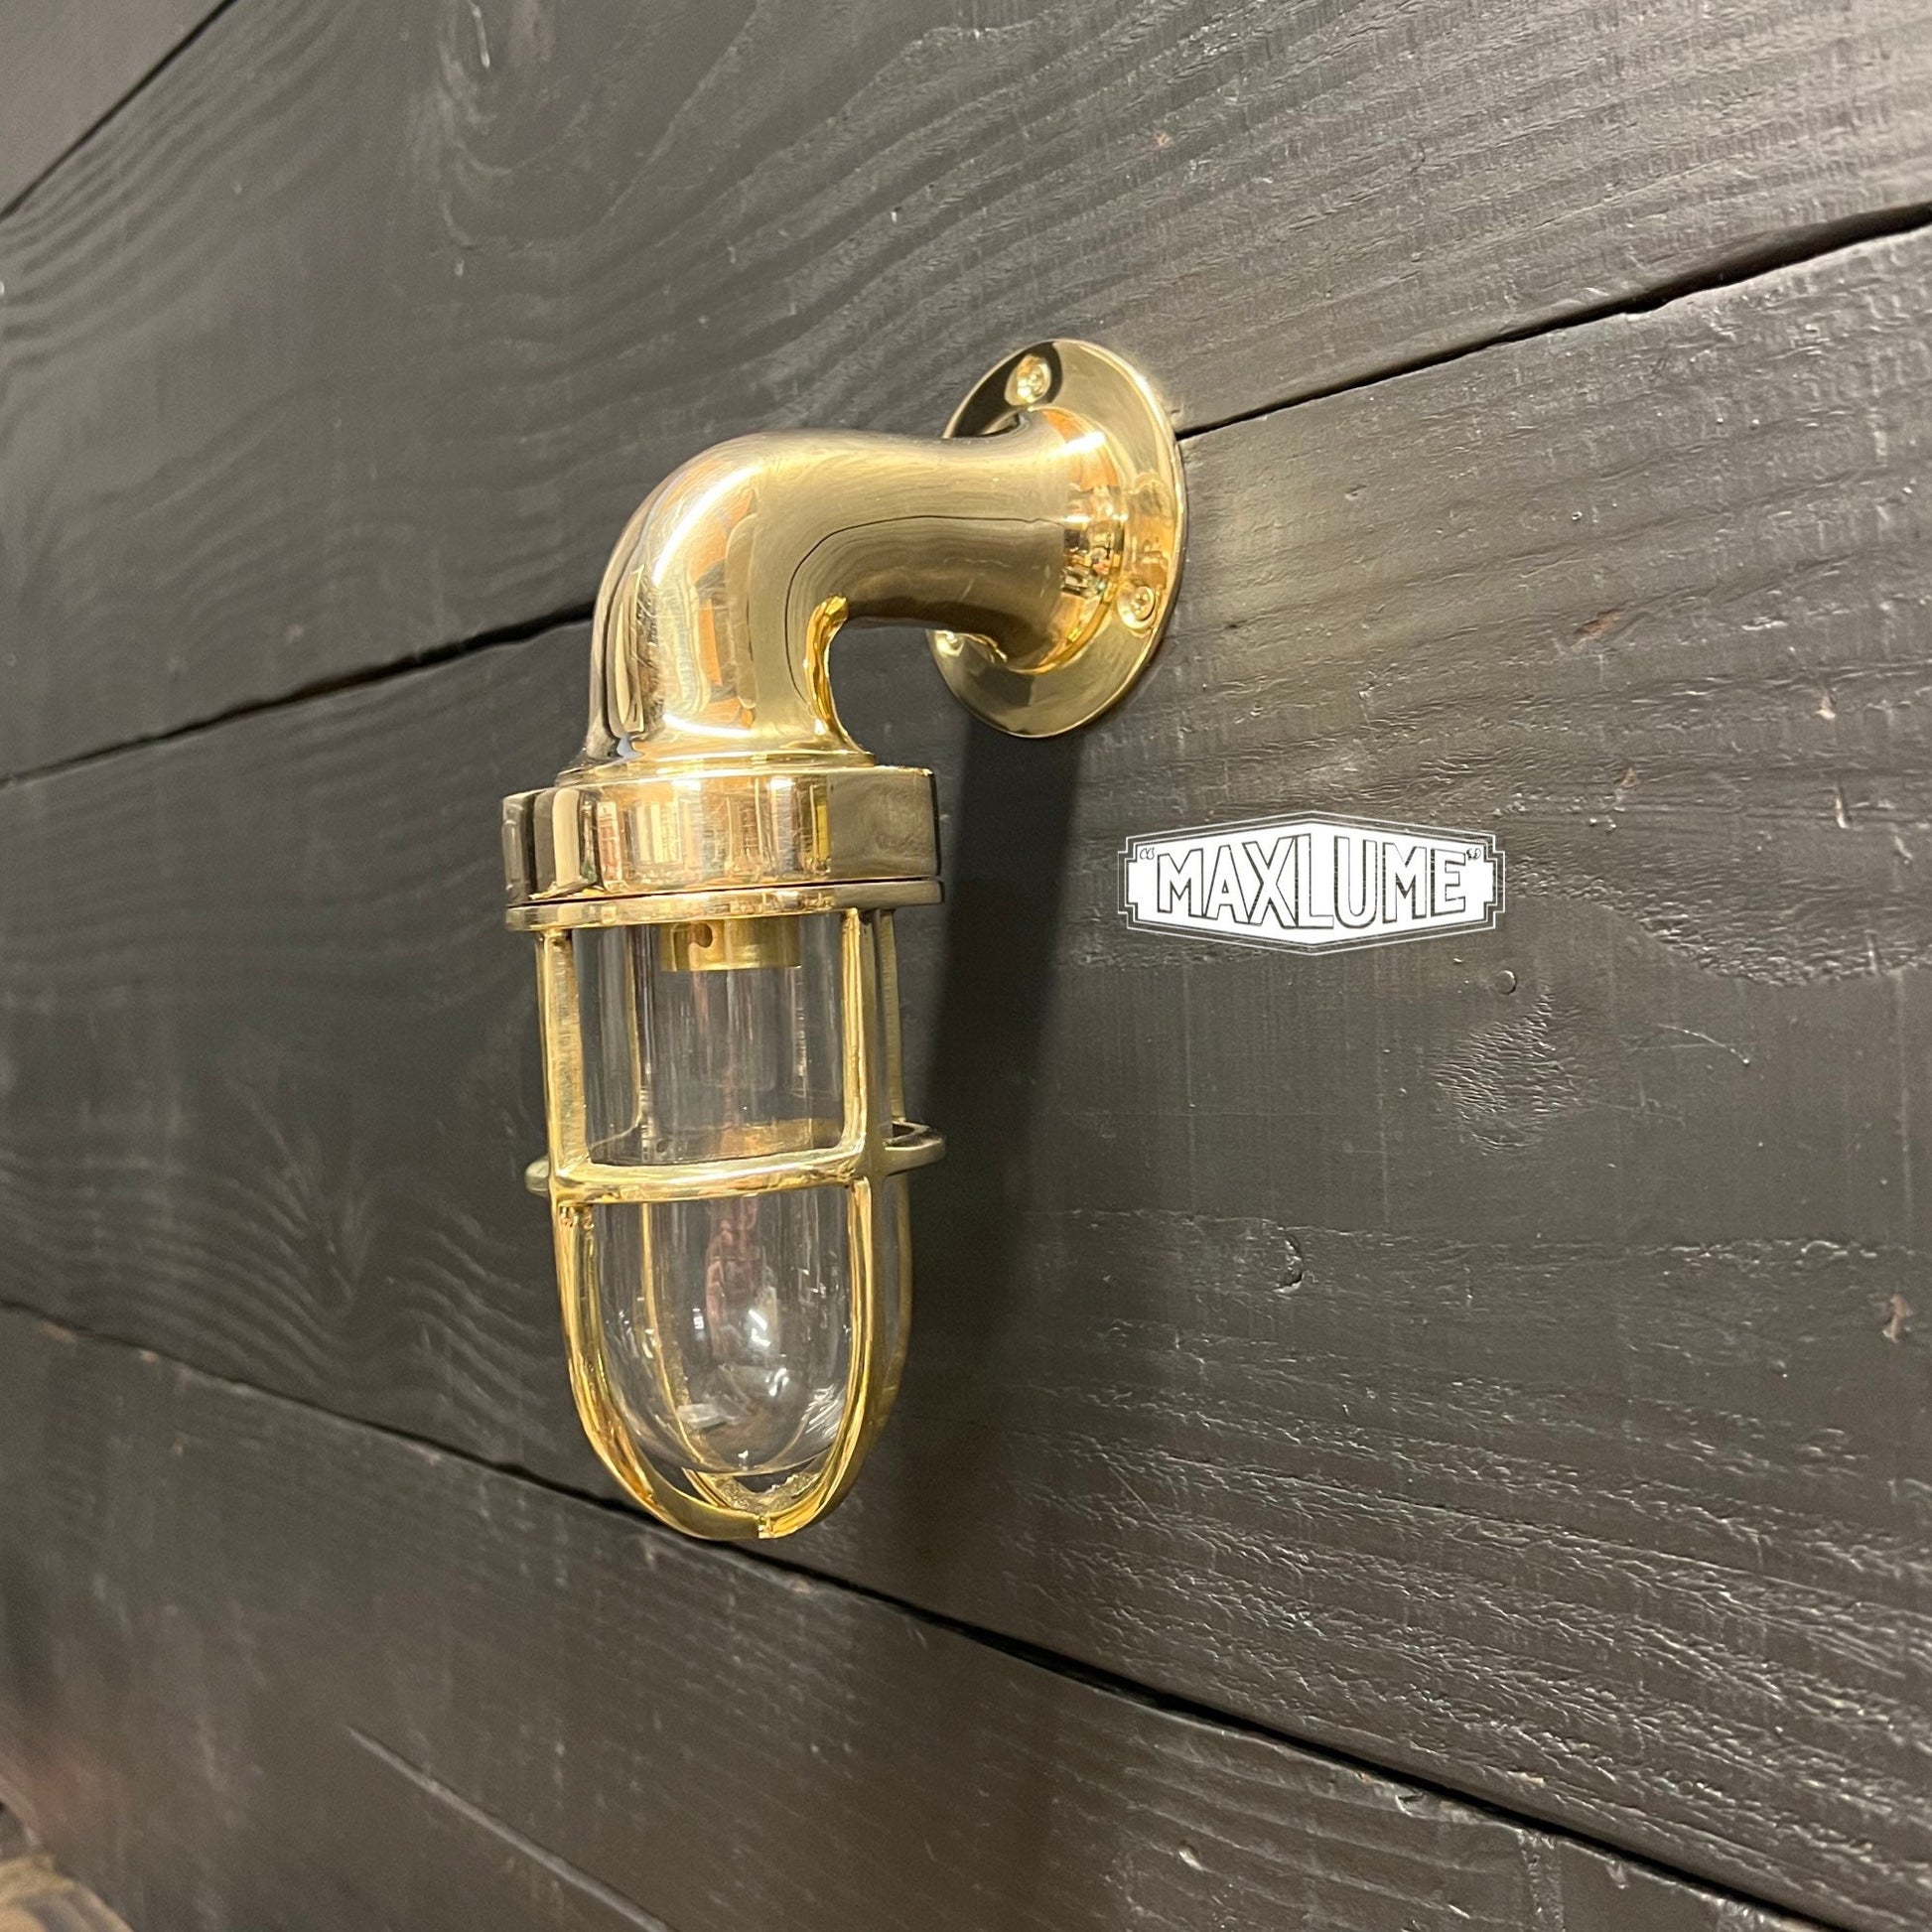 Shingham - Small Solid Brass Swan Neck Industrial Cargo Ship Sconce Marine Light Bulkhead Hand Crafted Wall Light Nautical Passage Way